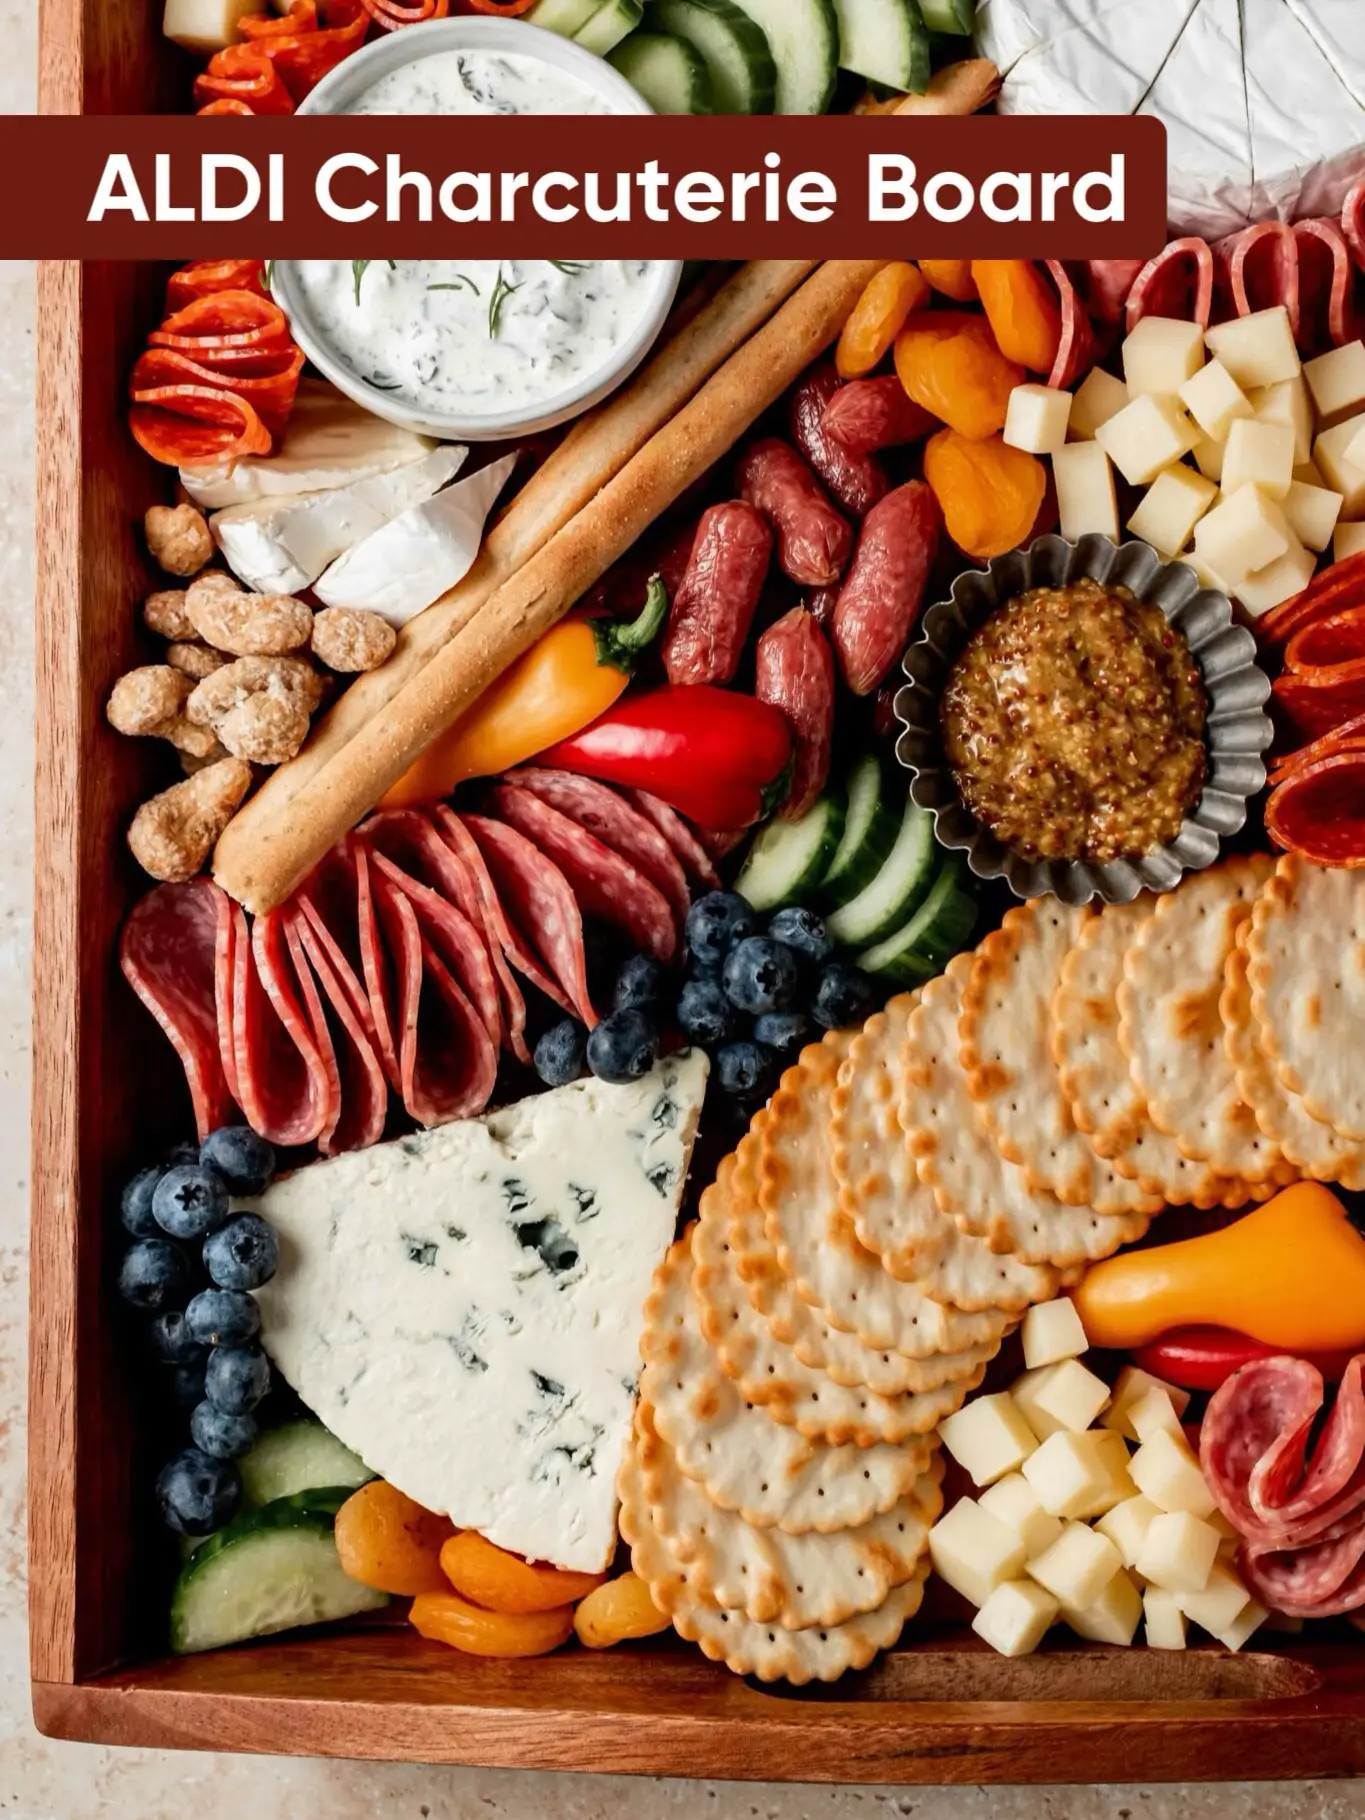 Charcuterie Board for One - Lemon8 Search